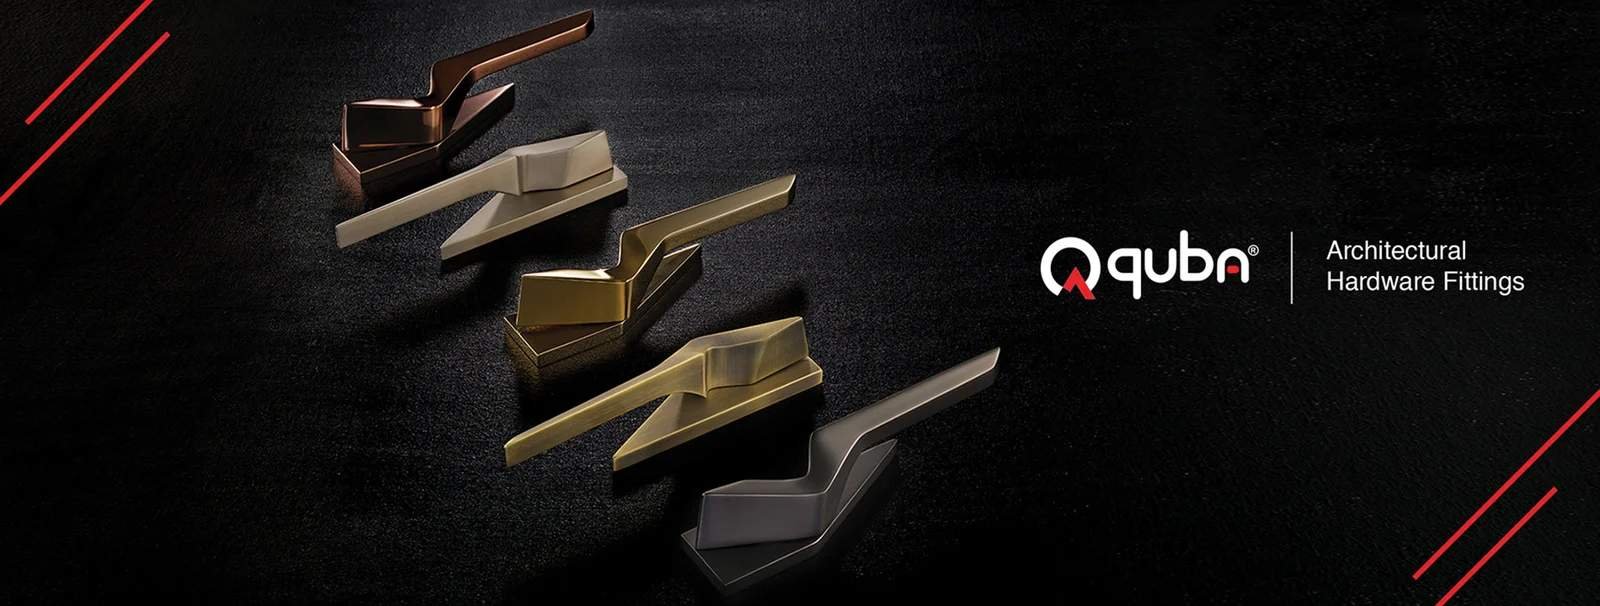 Quba Architectural Hardware Fittings Banner